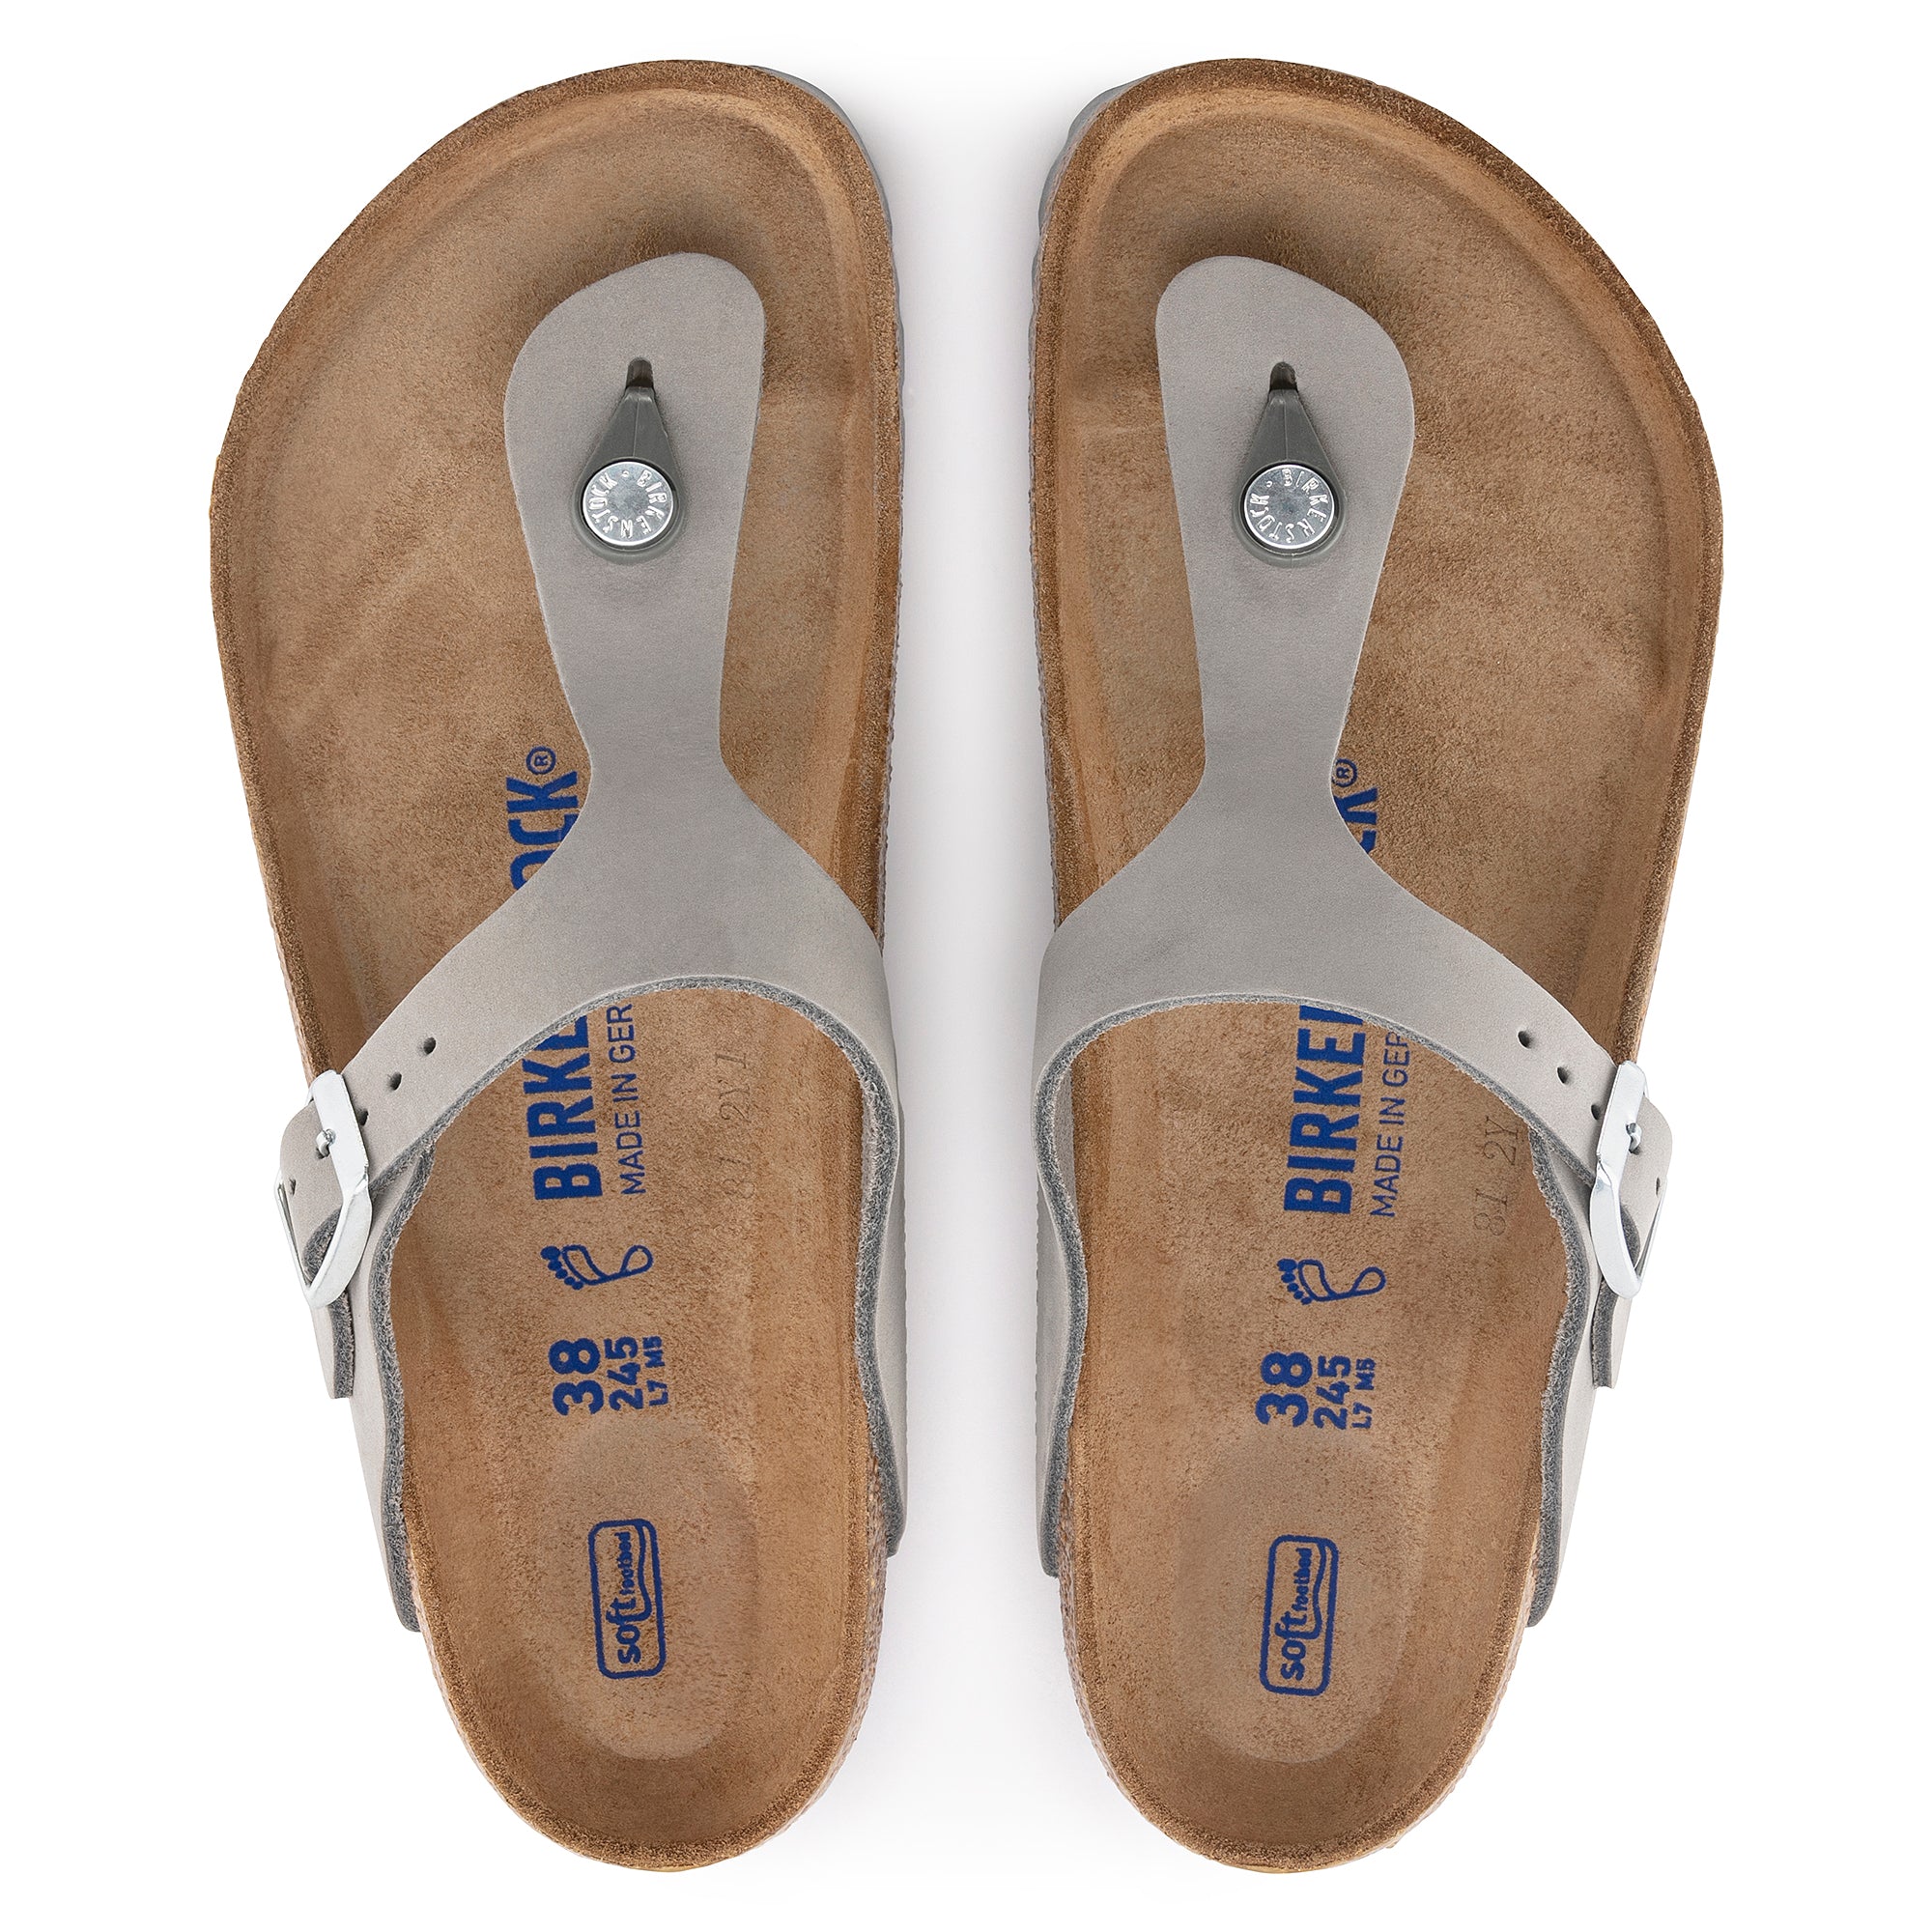 Birkenstock Limited Edition Gizeh Soft Footbed dove gray nubuck